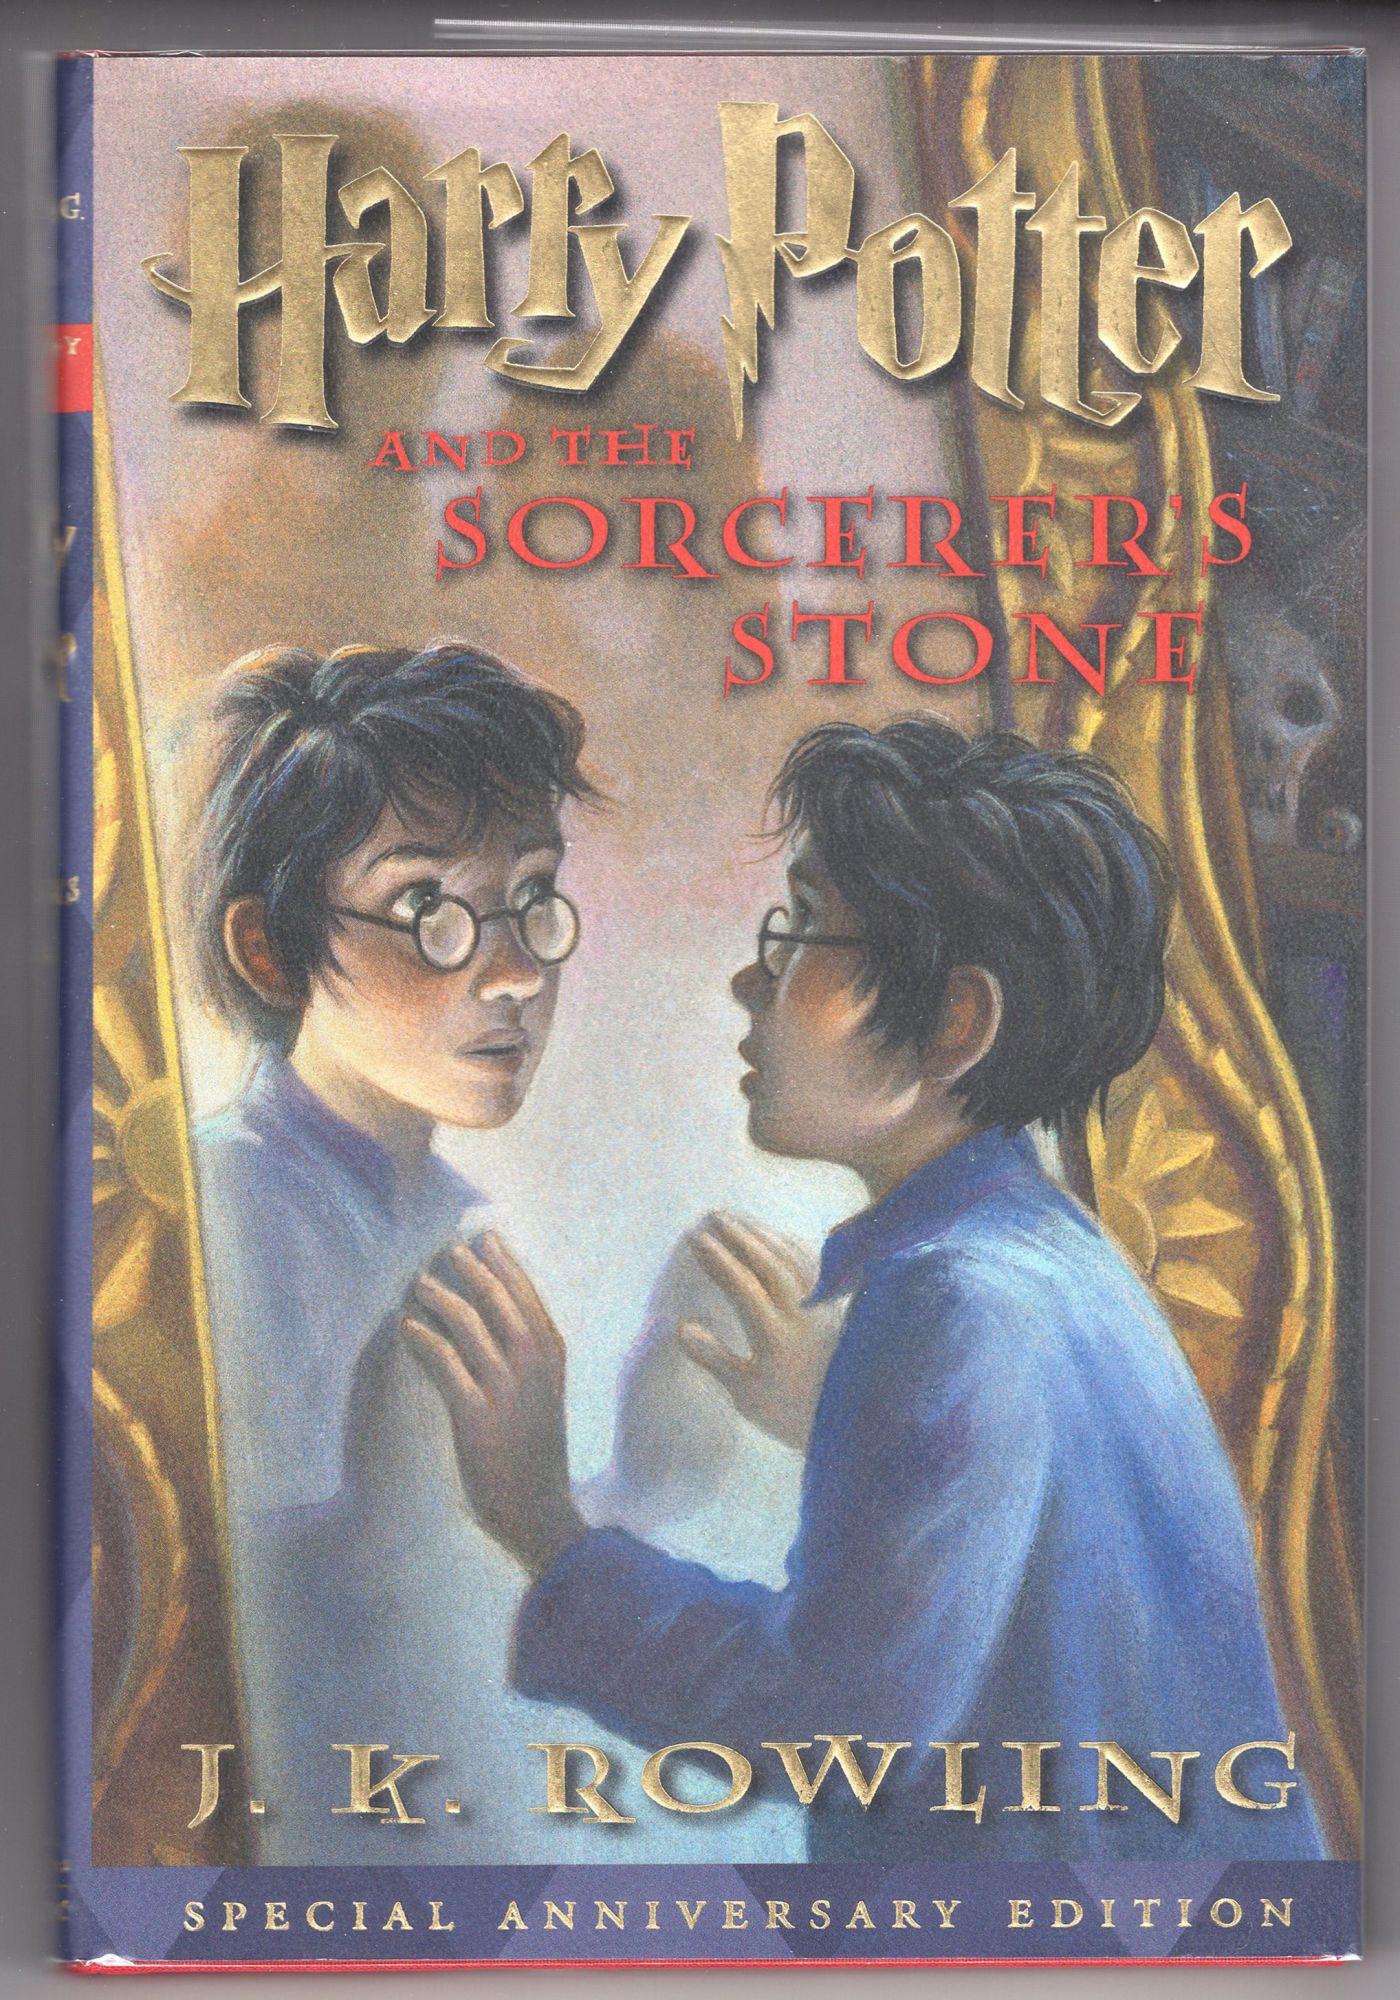 Harry Potter and the Sorcerer's Stone J. K. Rowling First edition thus